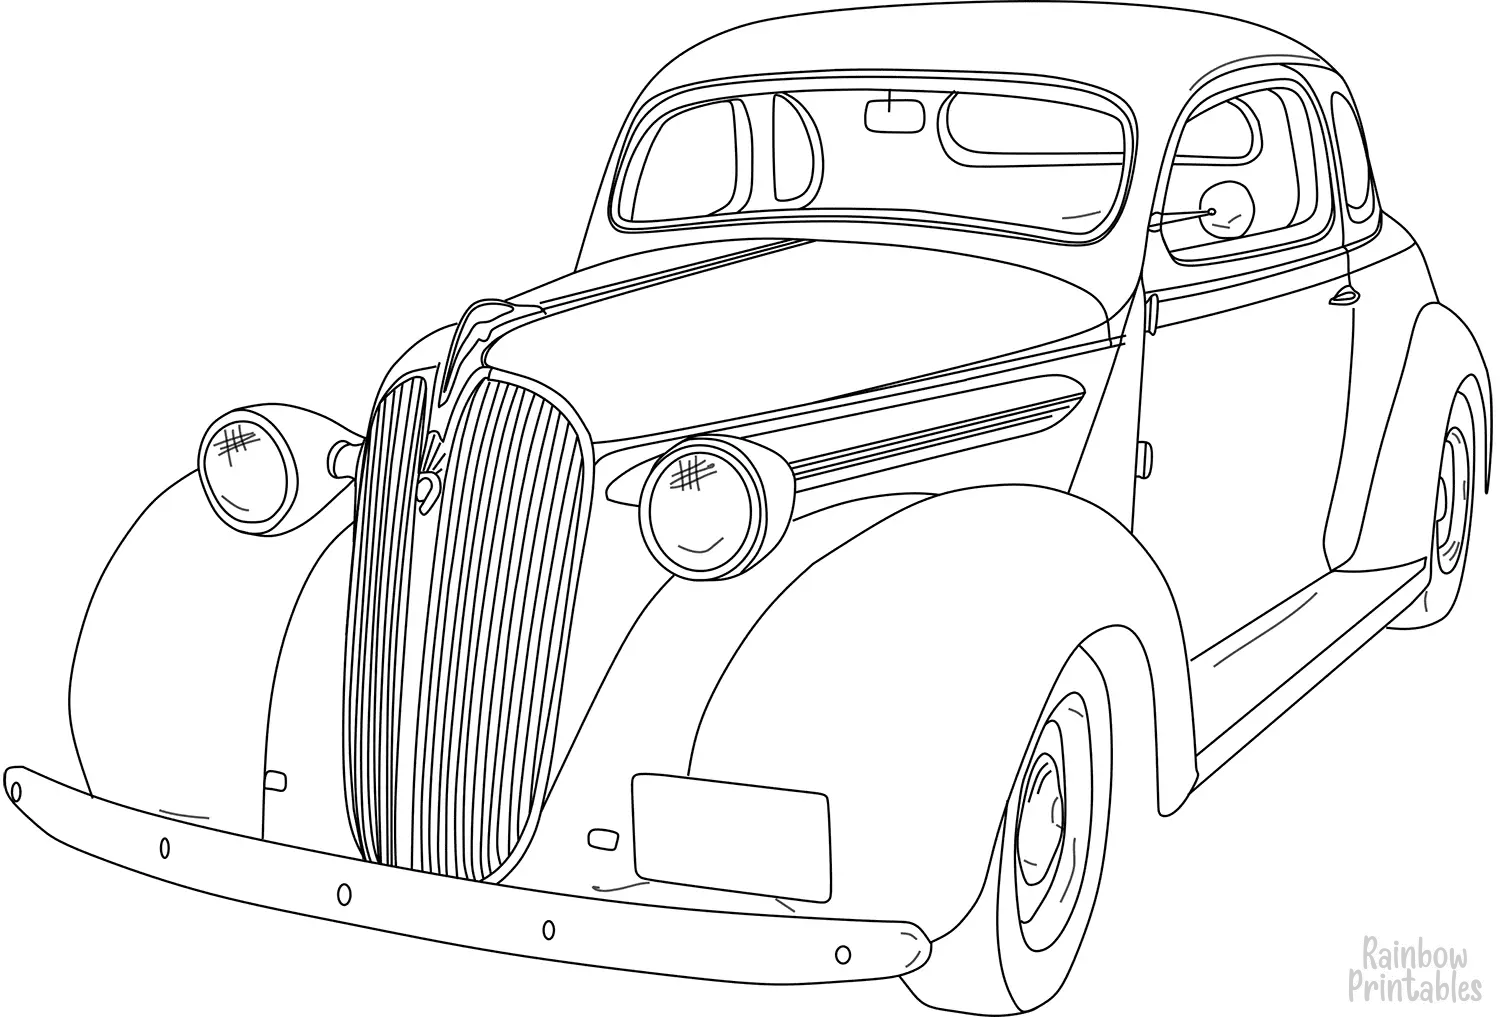 Vintage-cars-1930s-chevy-coupe-Clipart Coloring Pages for Kids Adults Art Activities Line Art